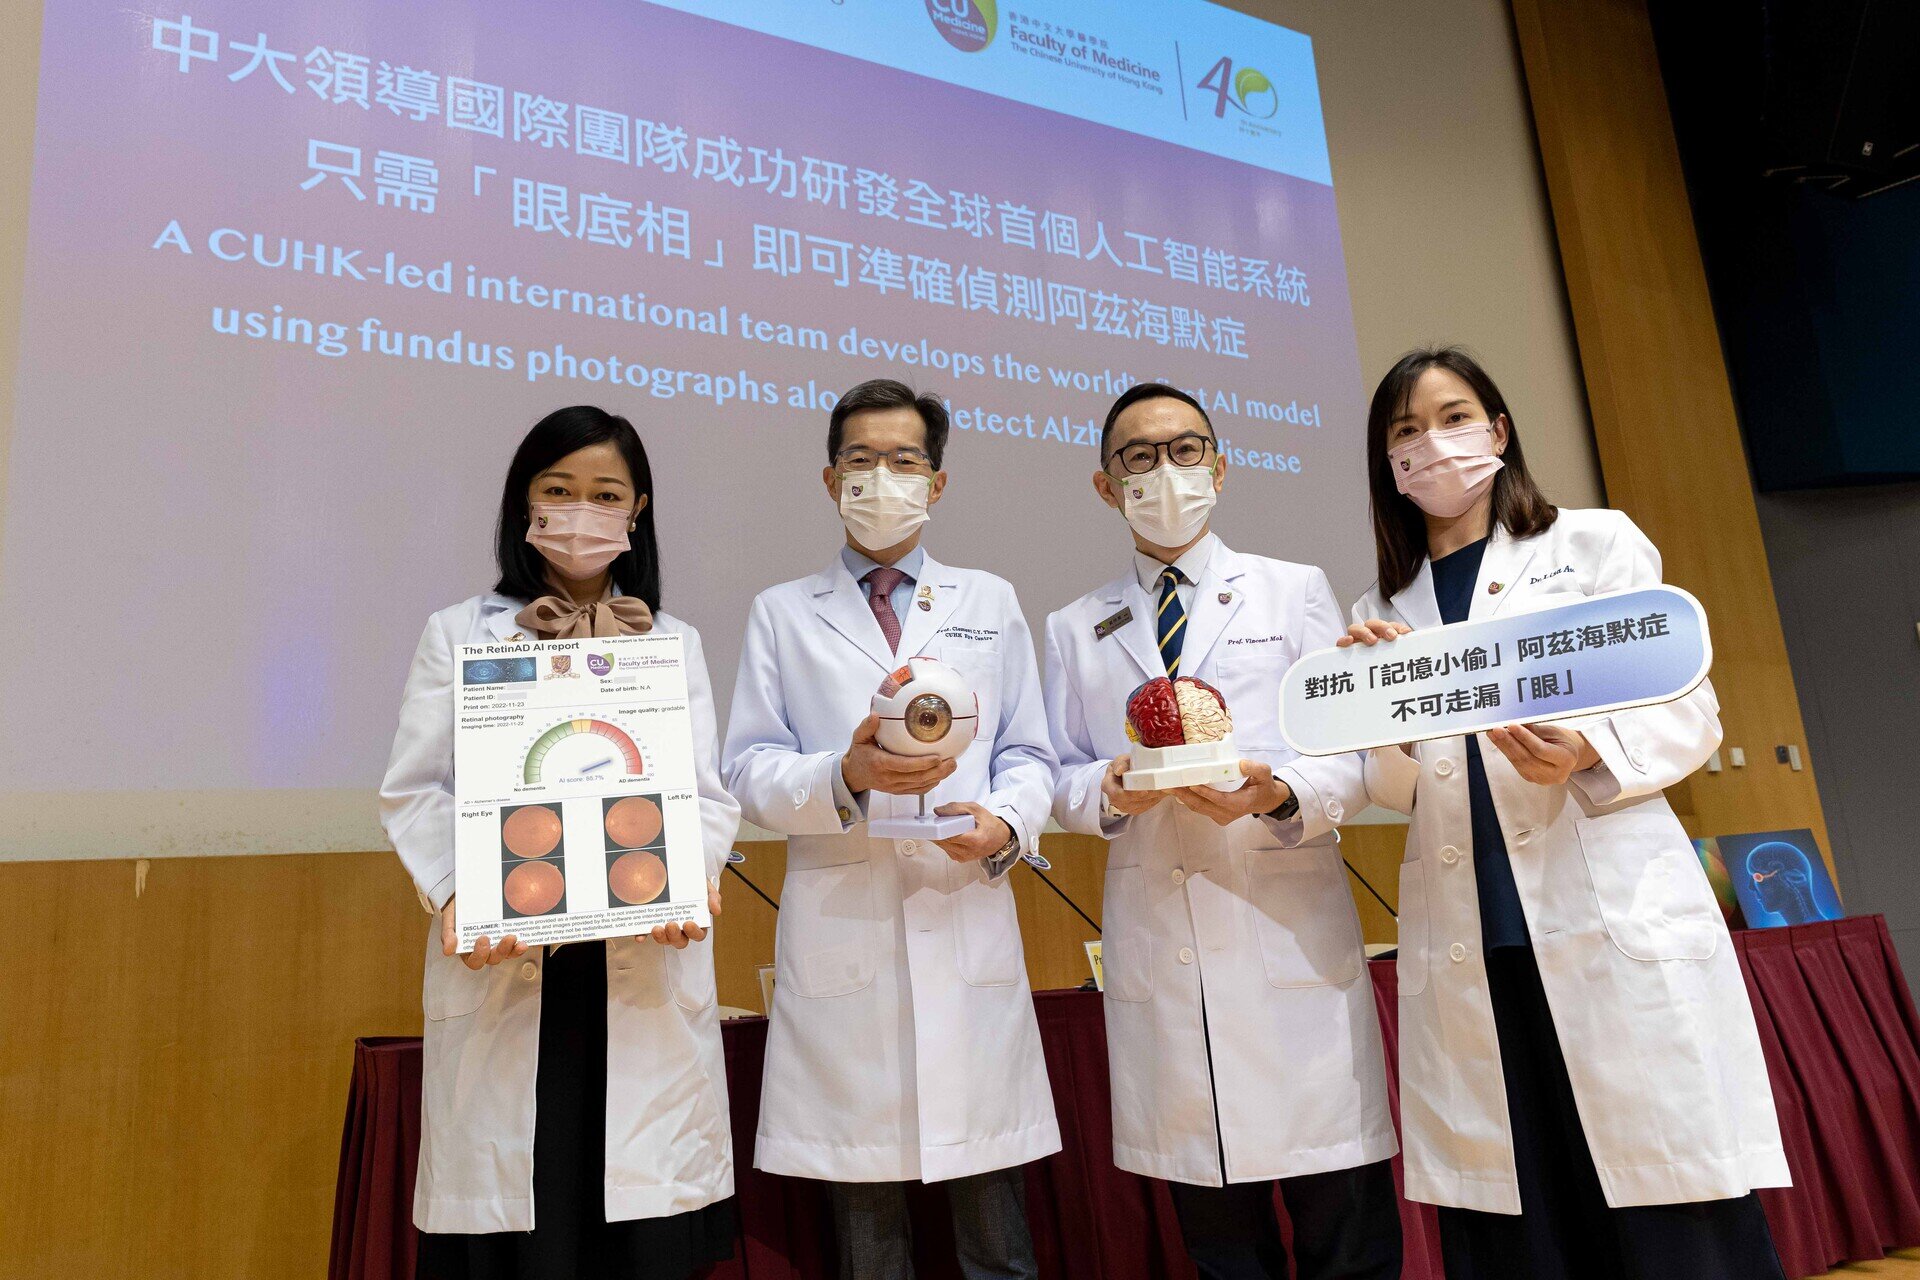 A CUHK-led international team develops the world’s first AI model using fundus photographs alone to detect Alzheimer’s disease